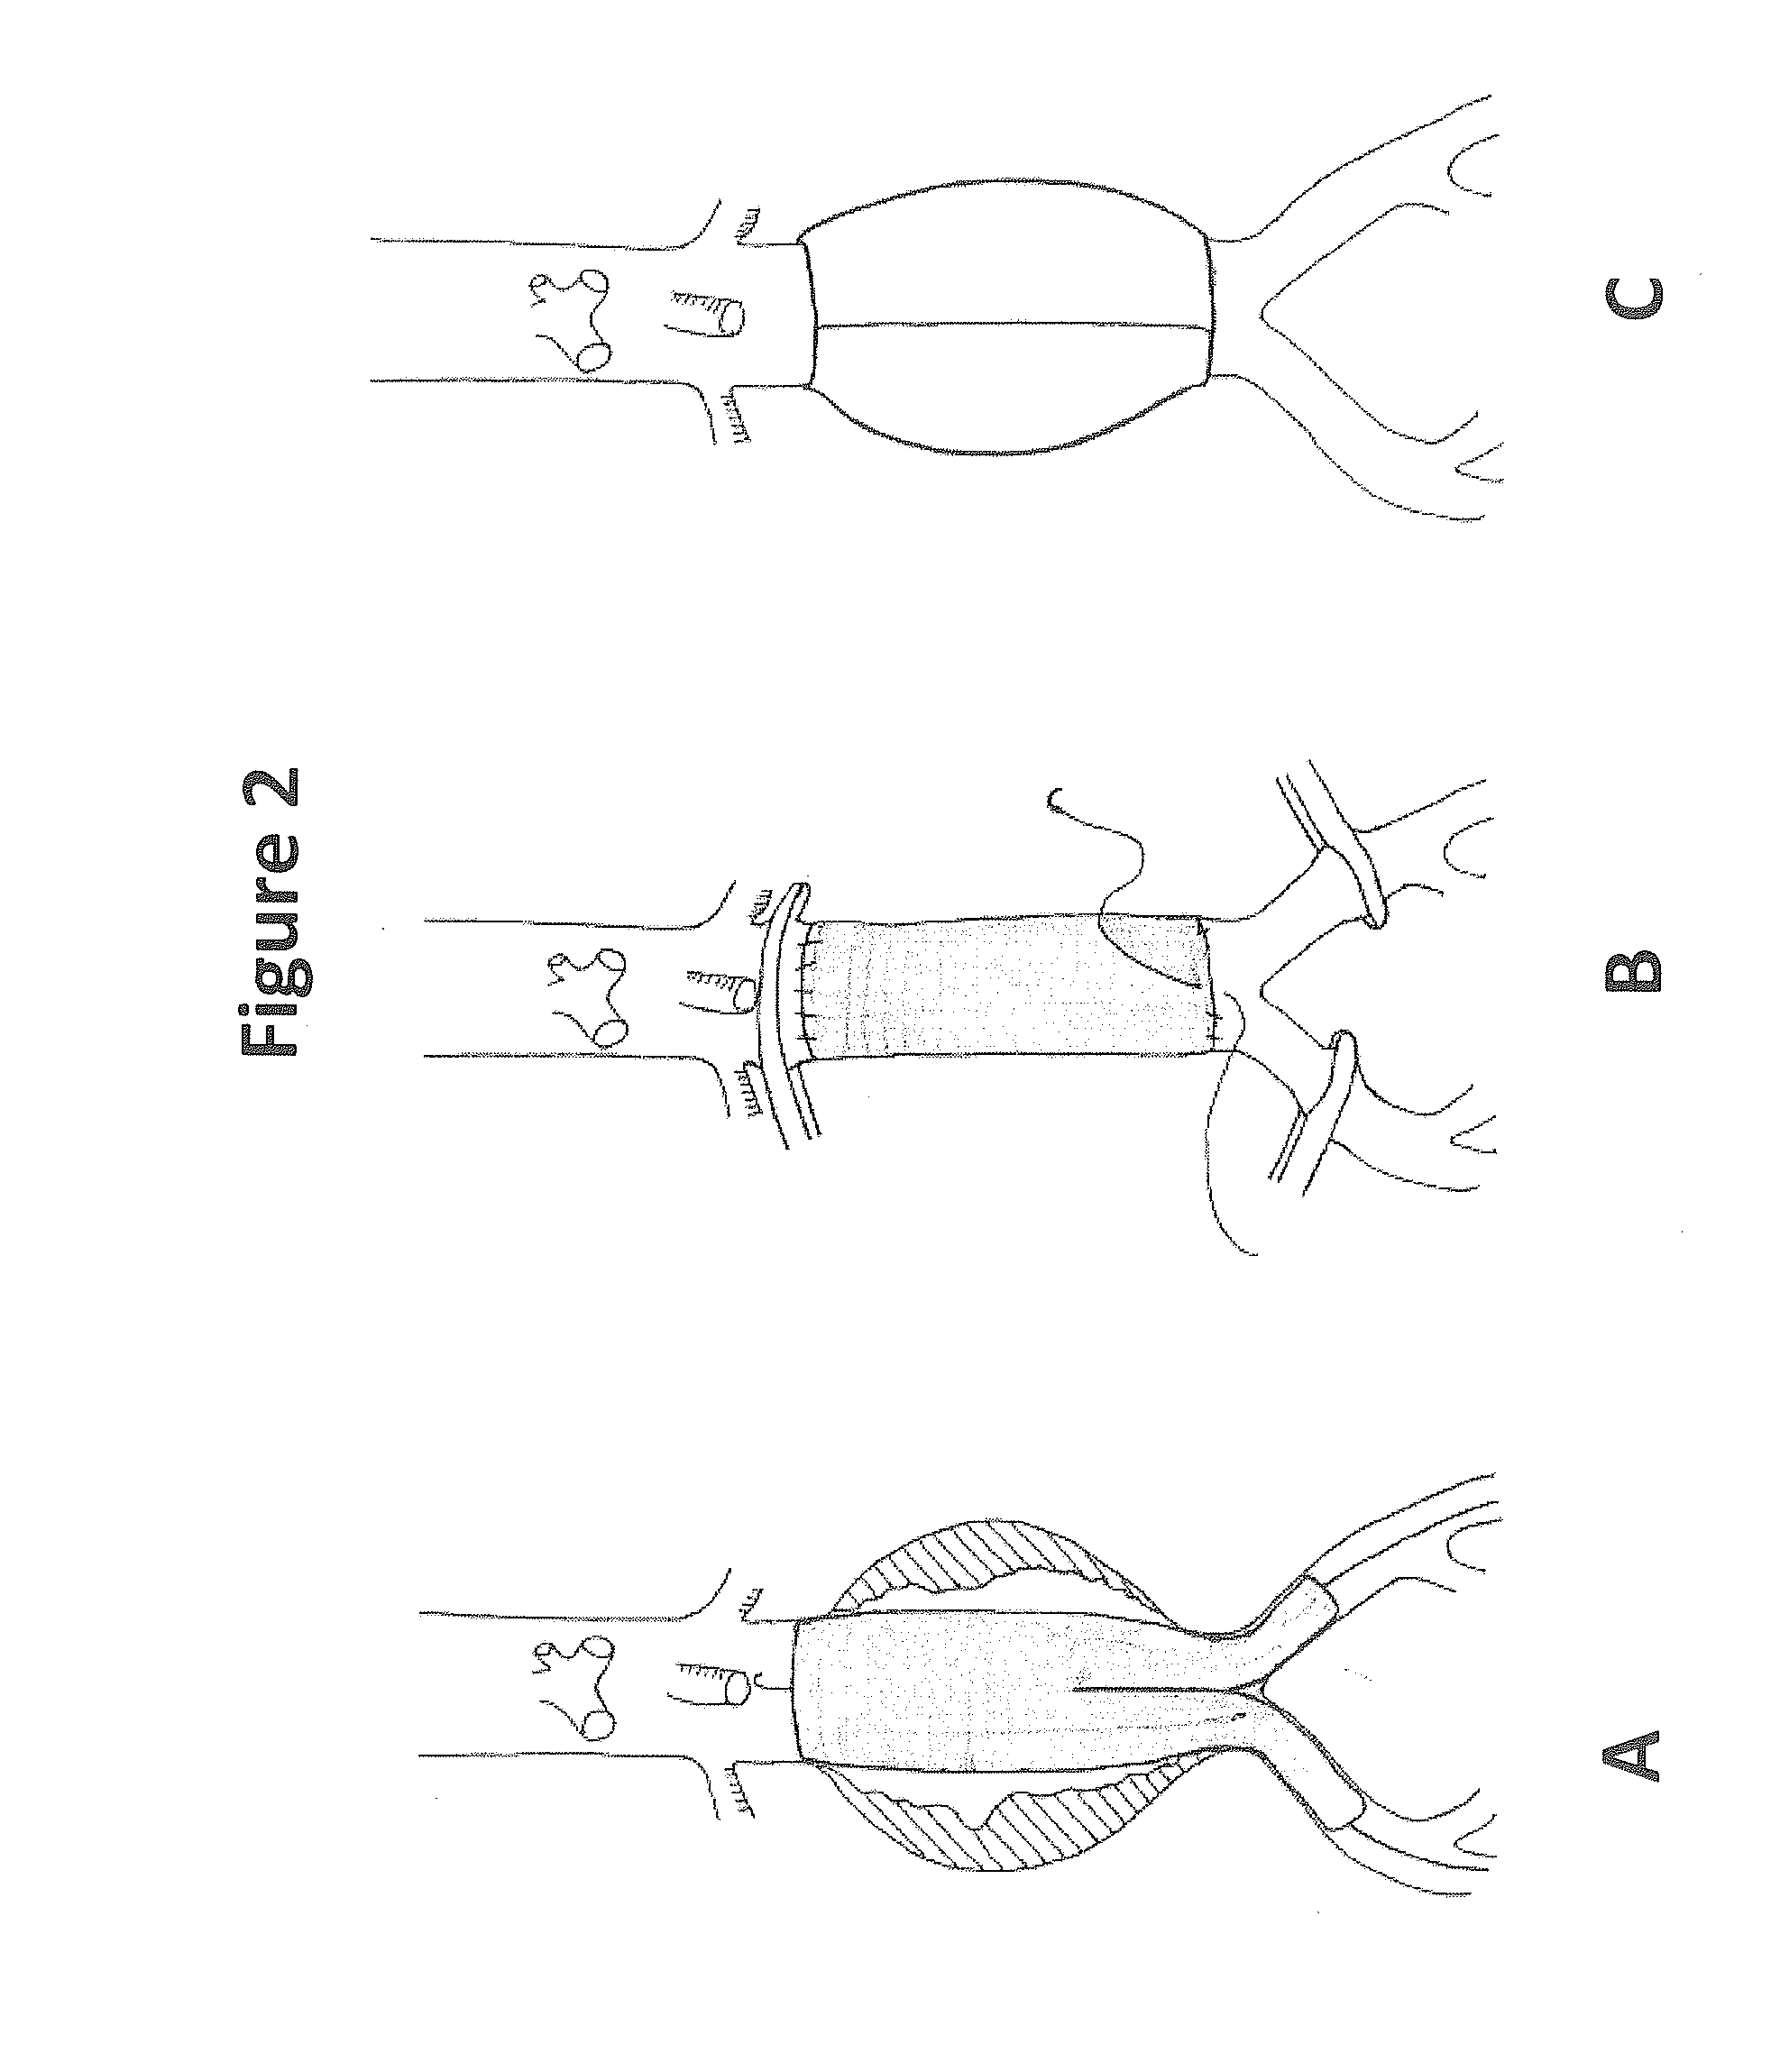 Treatment of aneurysm with application of connective tissue stabilization agent in combination with a delivery vehicle